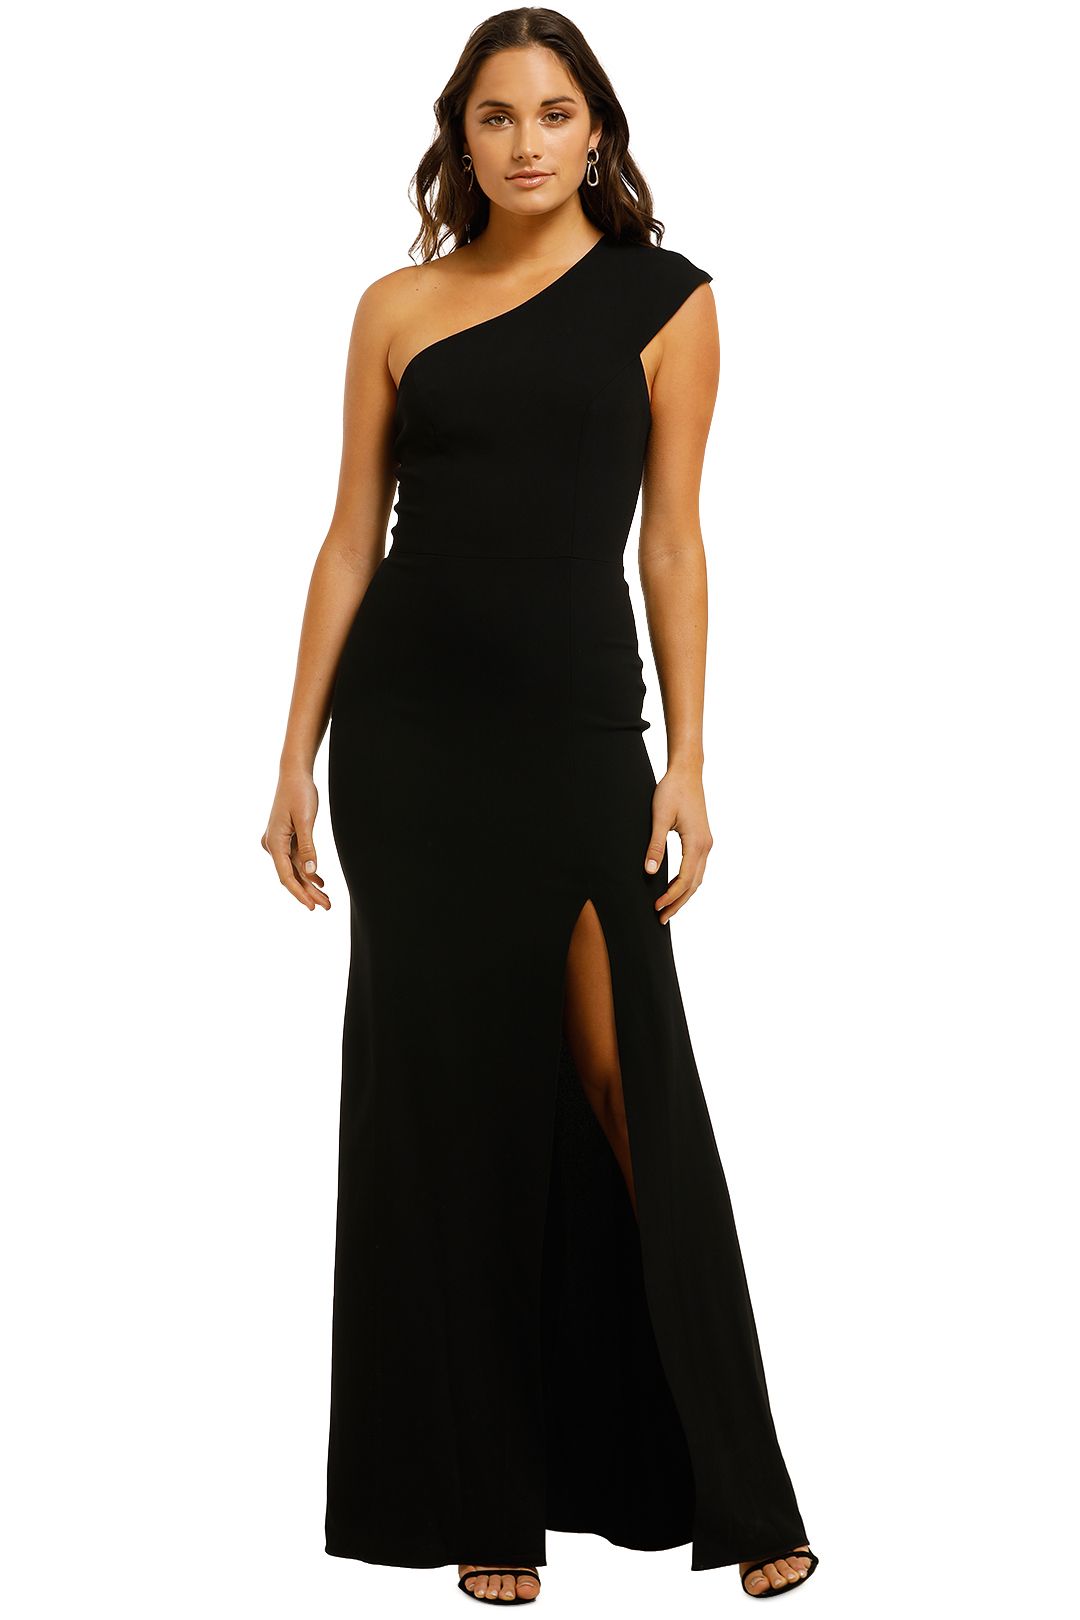 Ginger-and-Smart-Elixer-Gown-Black-Front